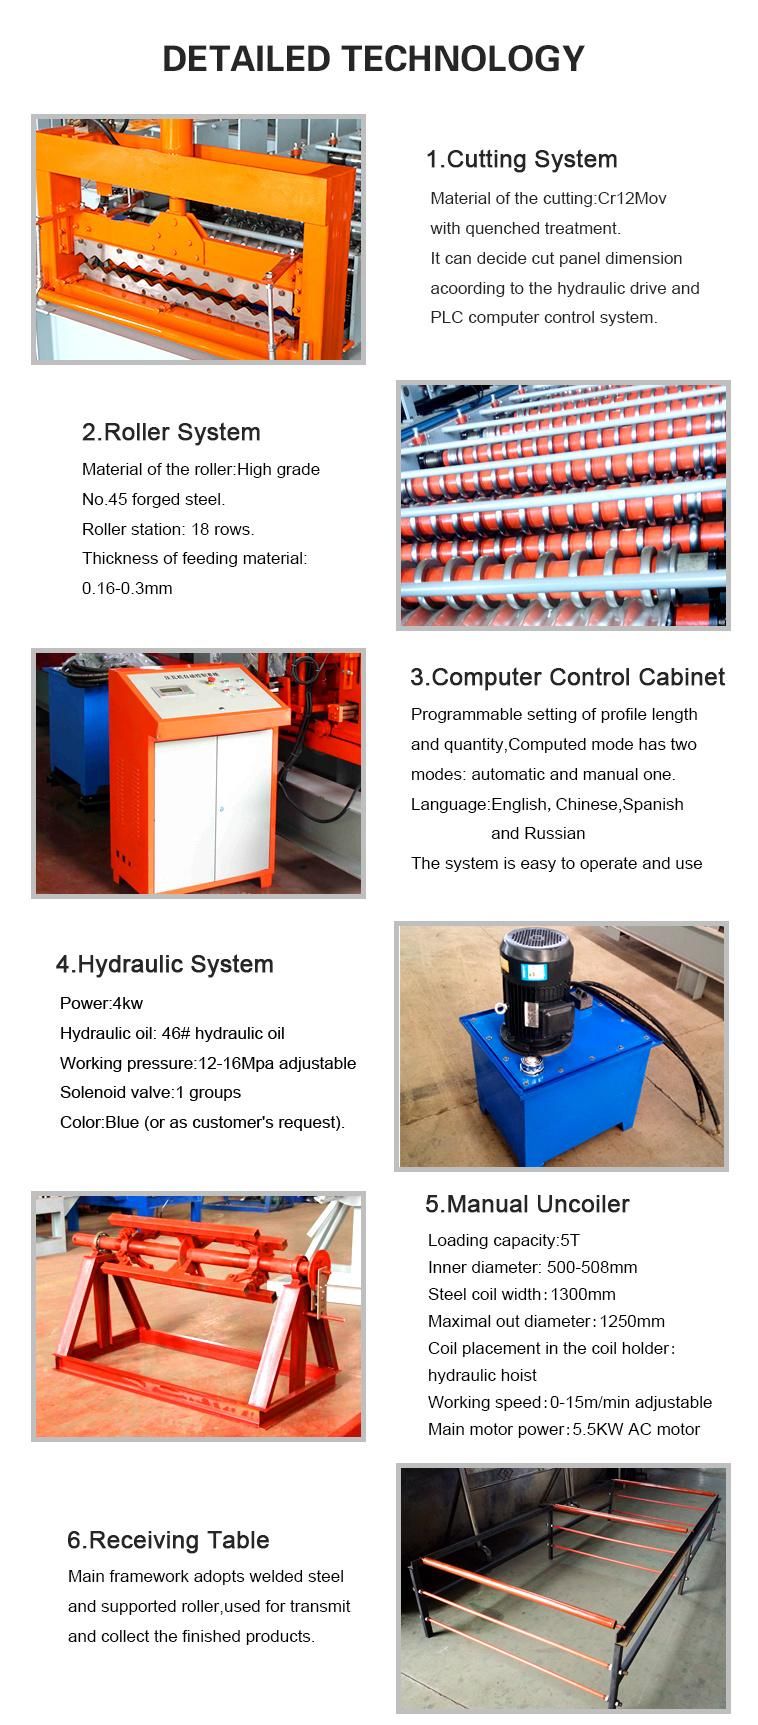 Colored Steel Xn Main Nude Packing with Plastic Film Roof Panel Roofing Roll Forming Machine